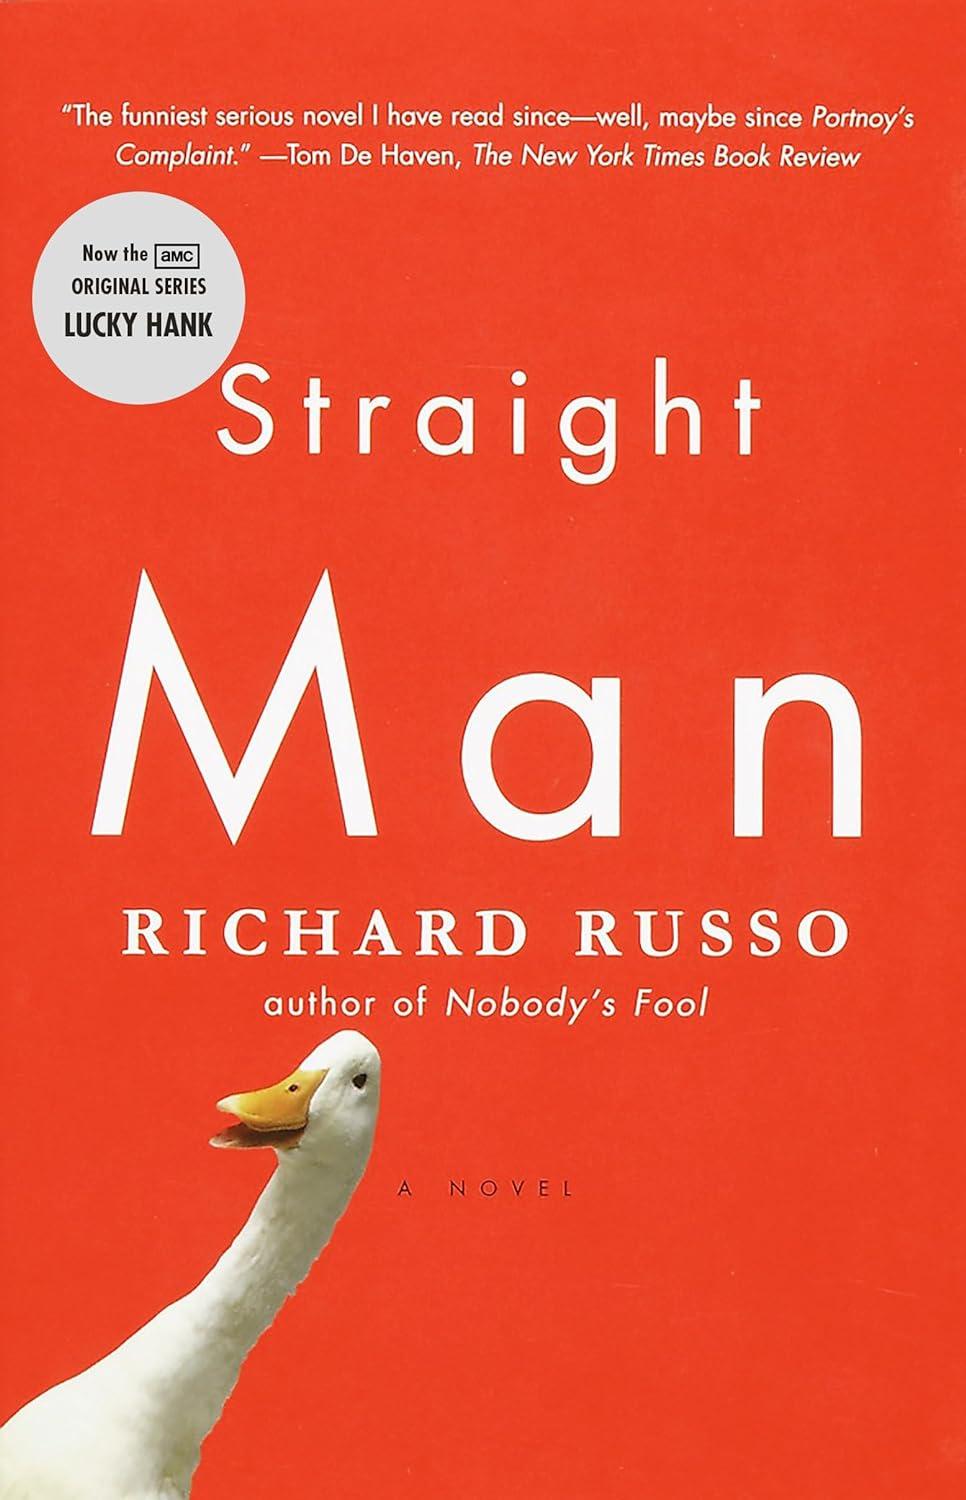 Book cover of "Straight Man" by Richard Russo.